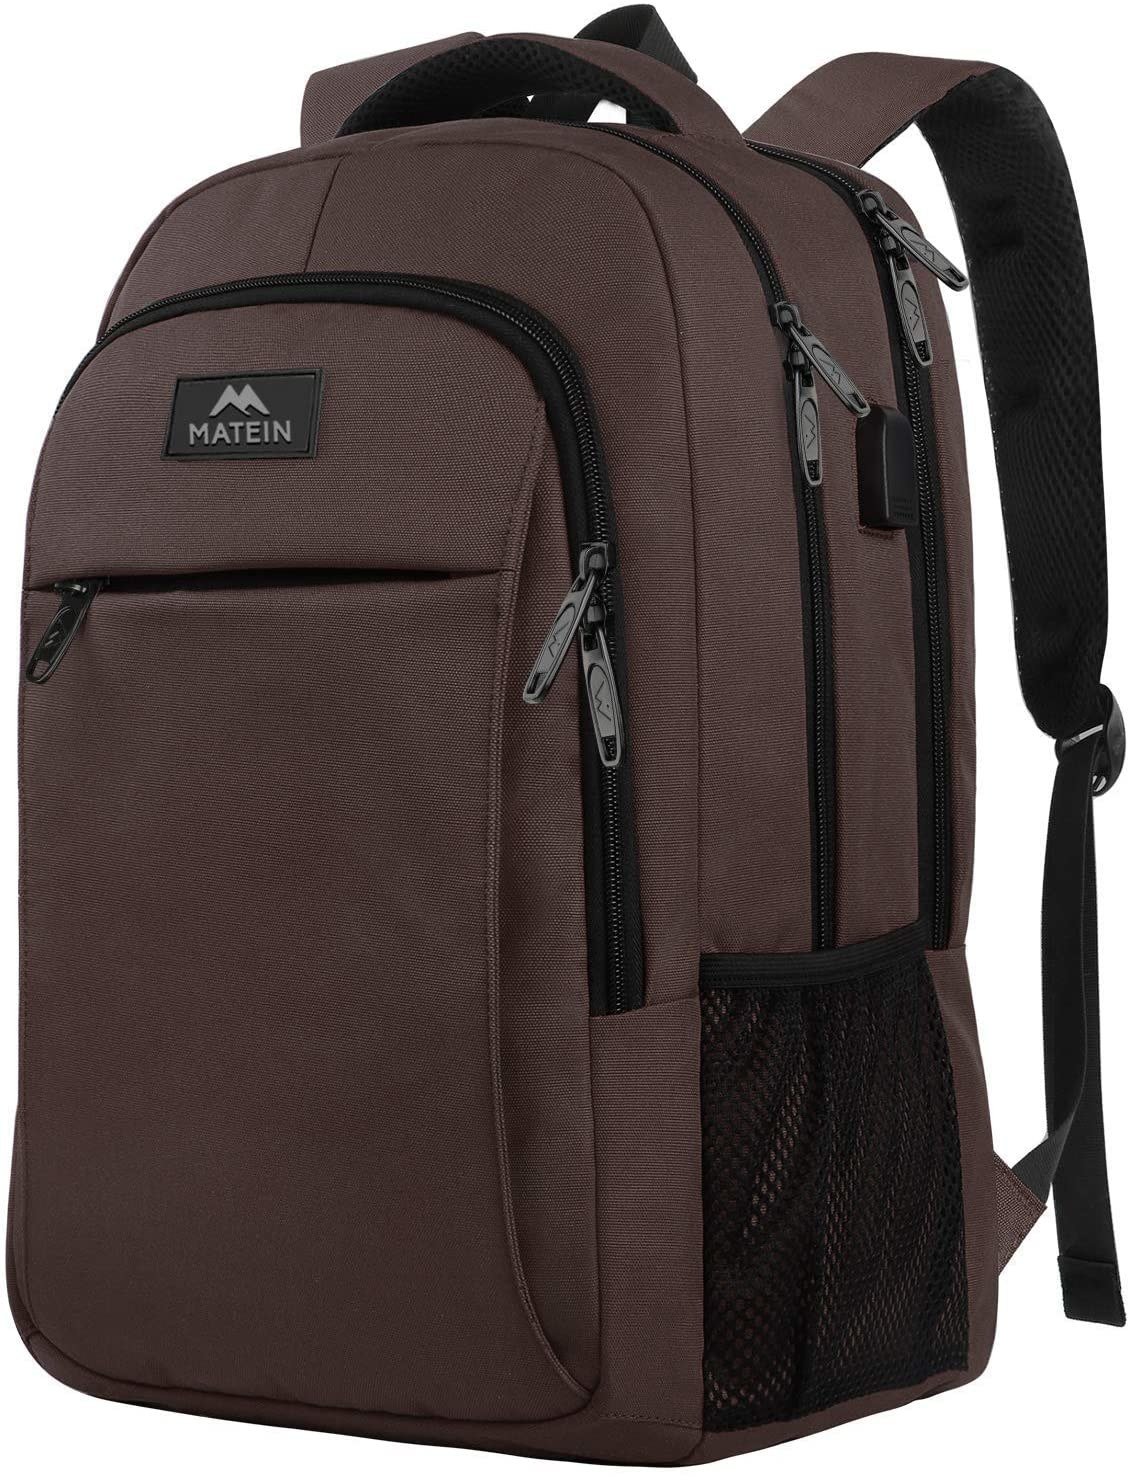 Brown backpack with black details